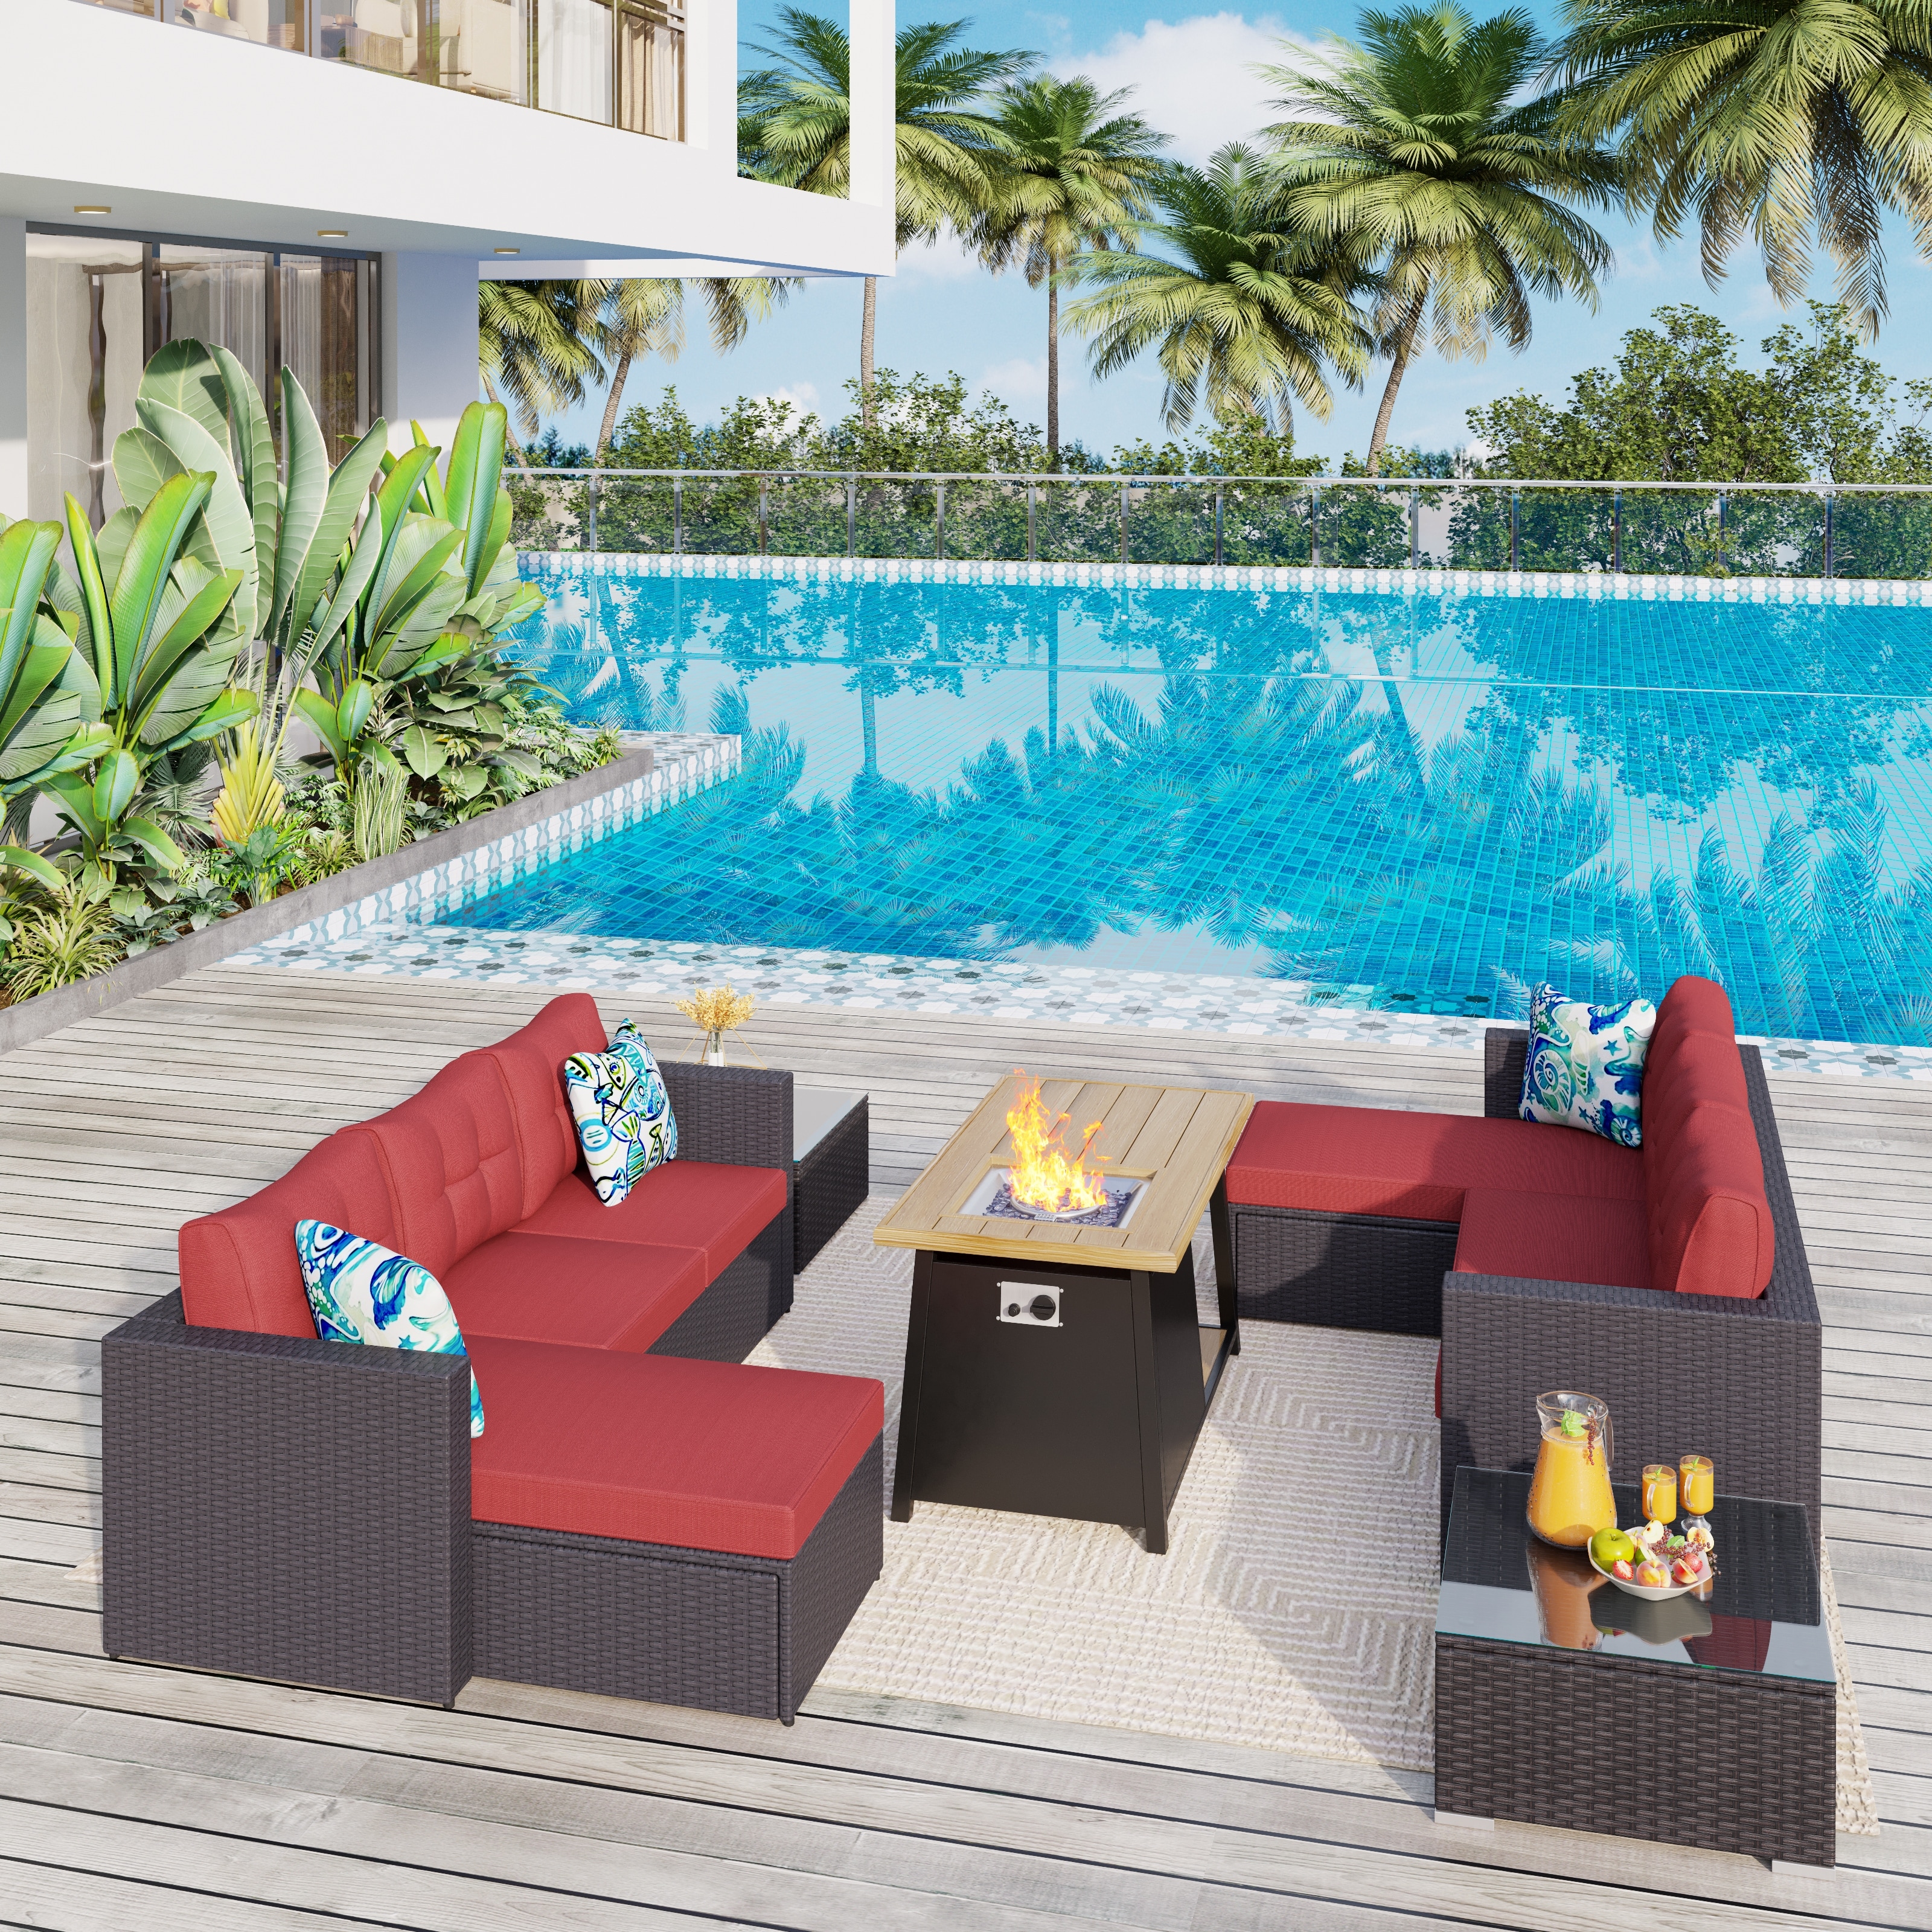 9-pieces Rattan Sectional Sofa Set With Coffee Table And Gas Fire Pit Table